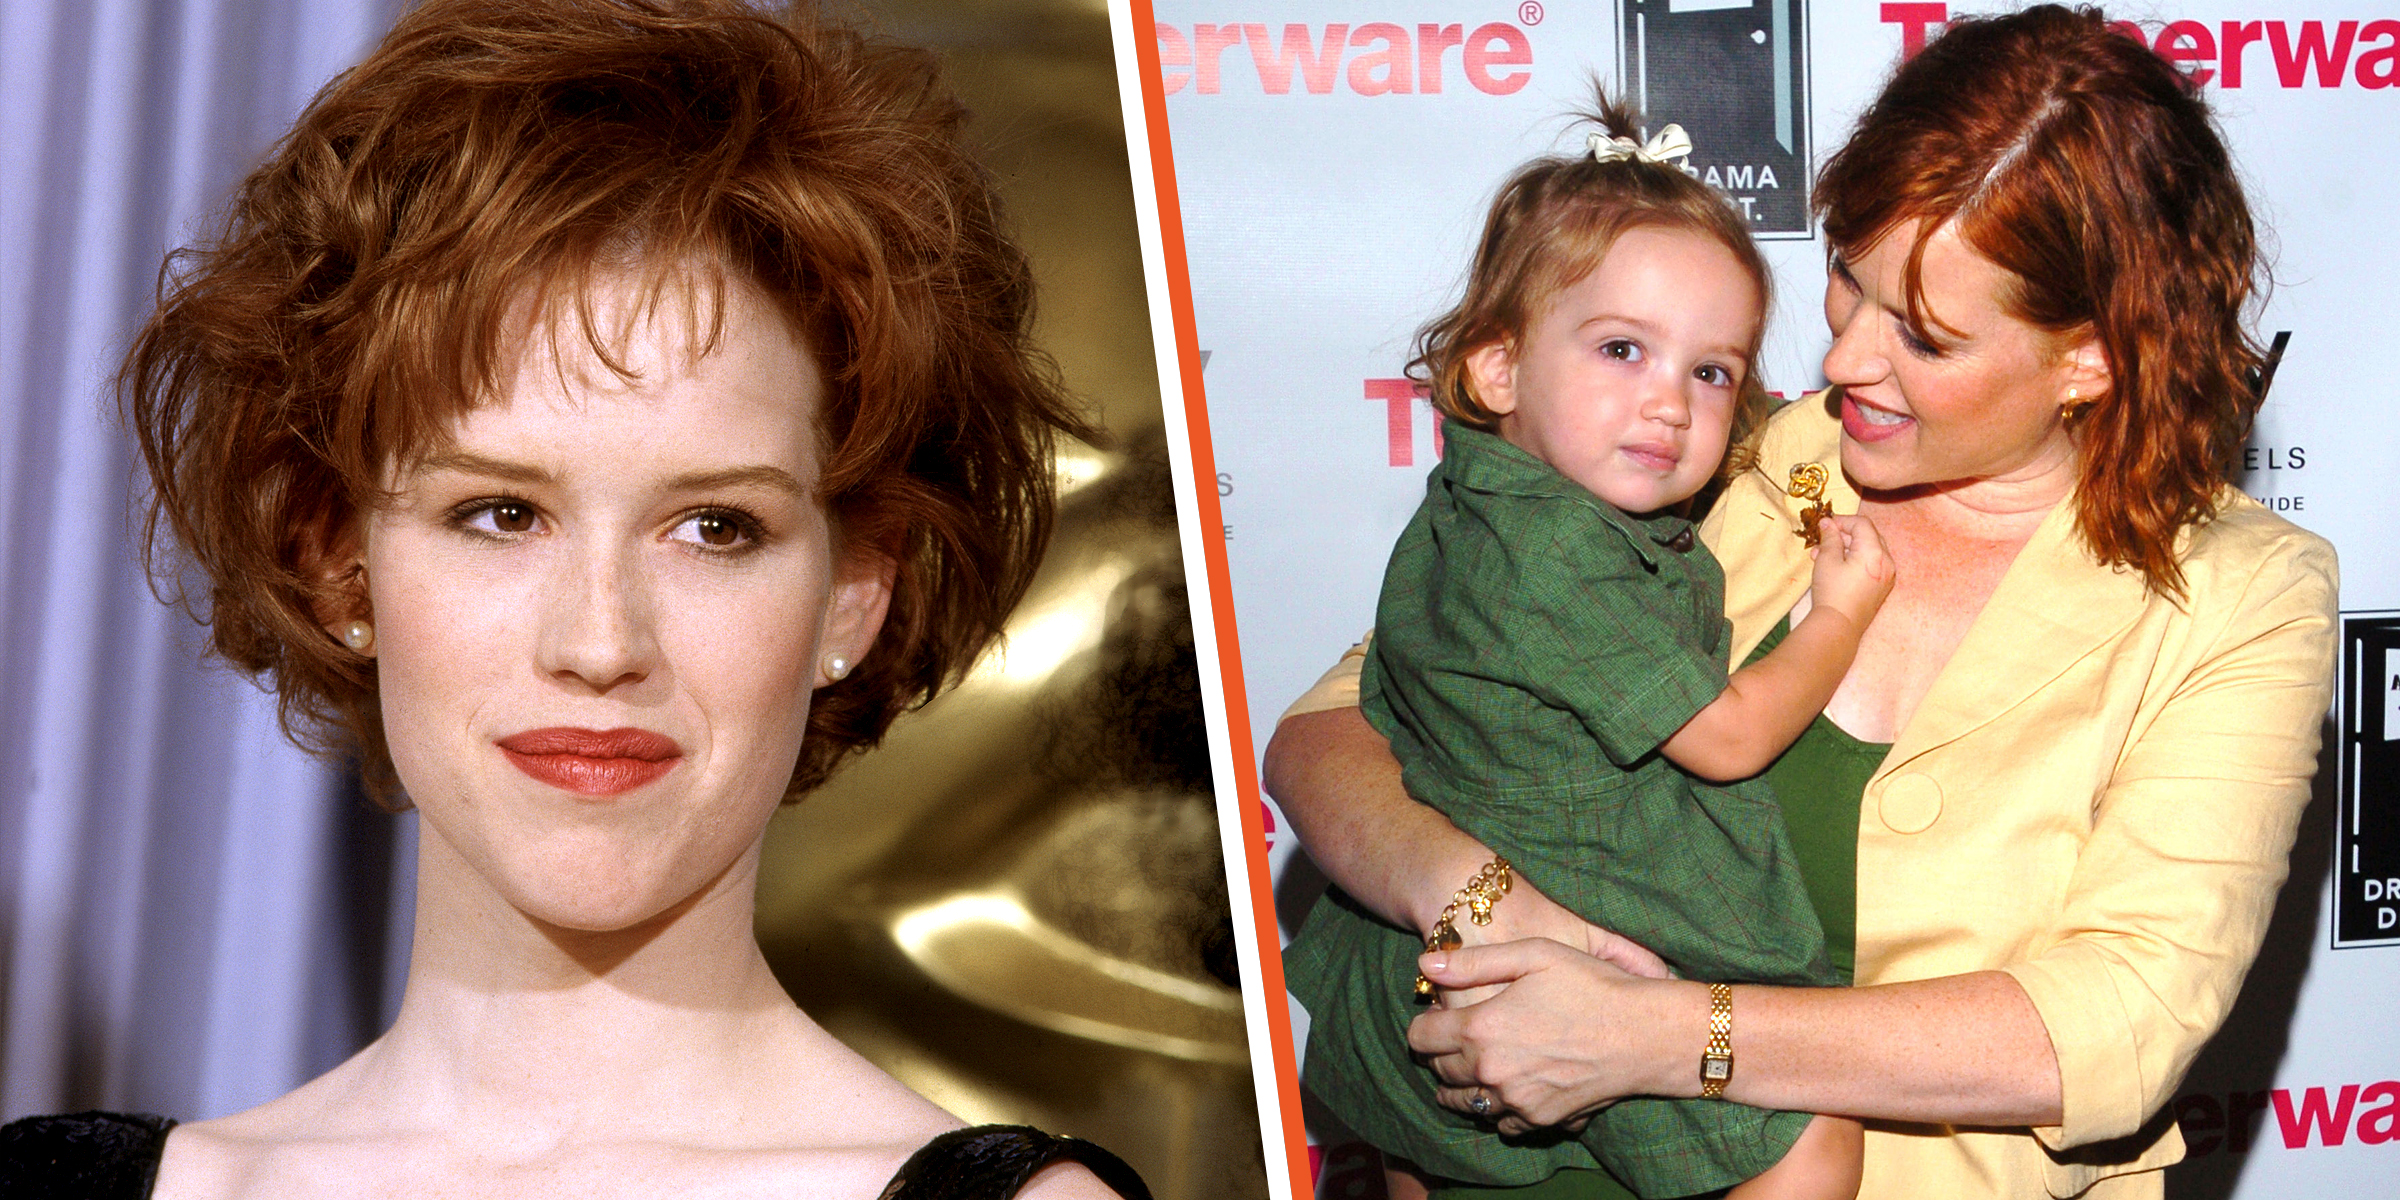 Molly Ringwald and Matilda Gianopoulos | Source: Getty Images